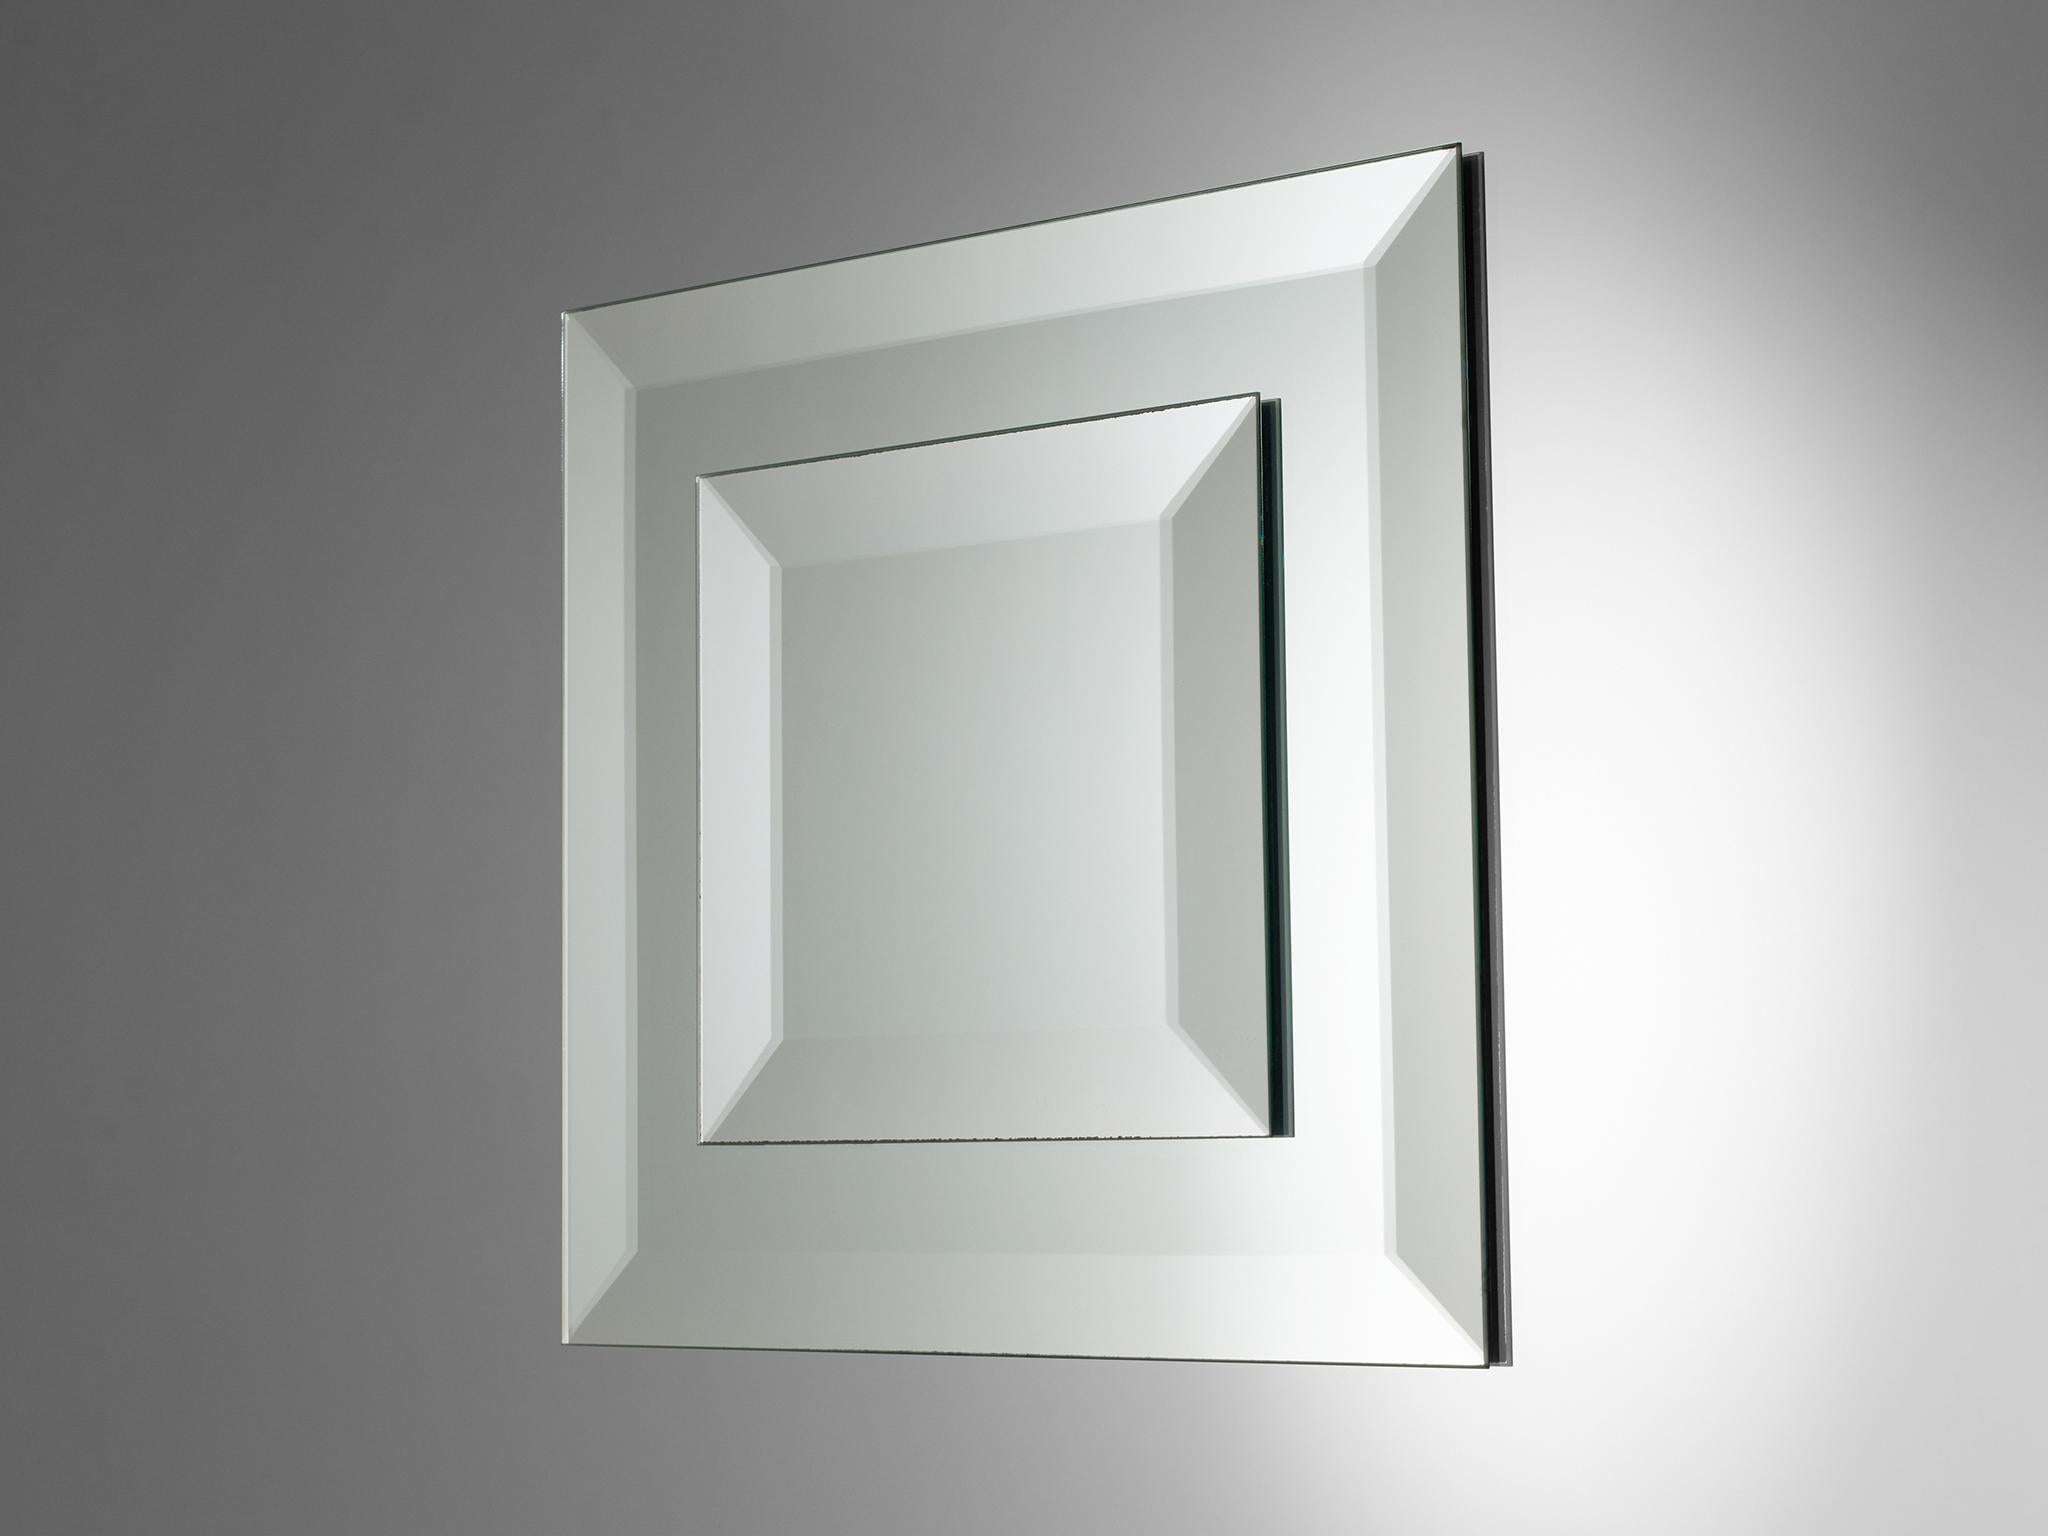 Late 20th Century Michel Martens Wall-Mounted Mirror Art